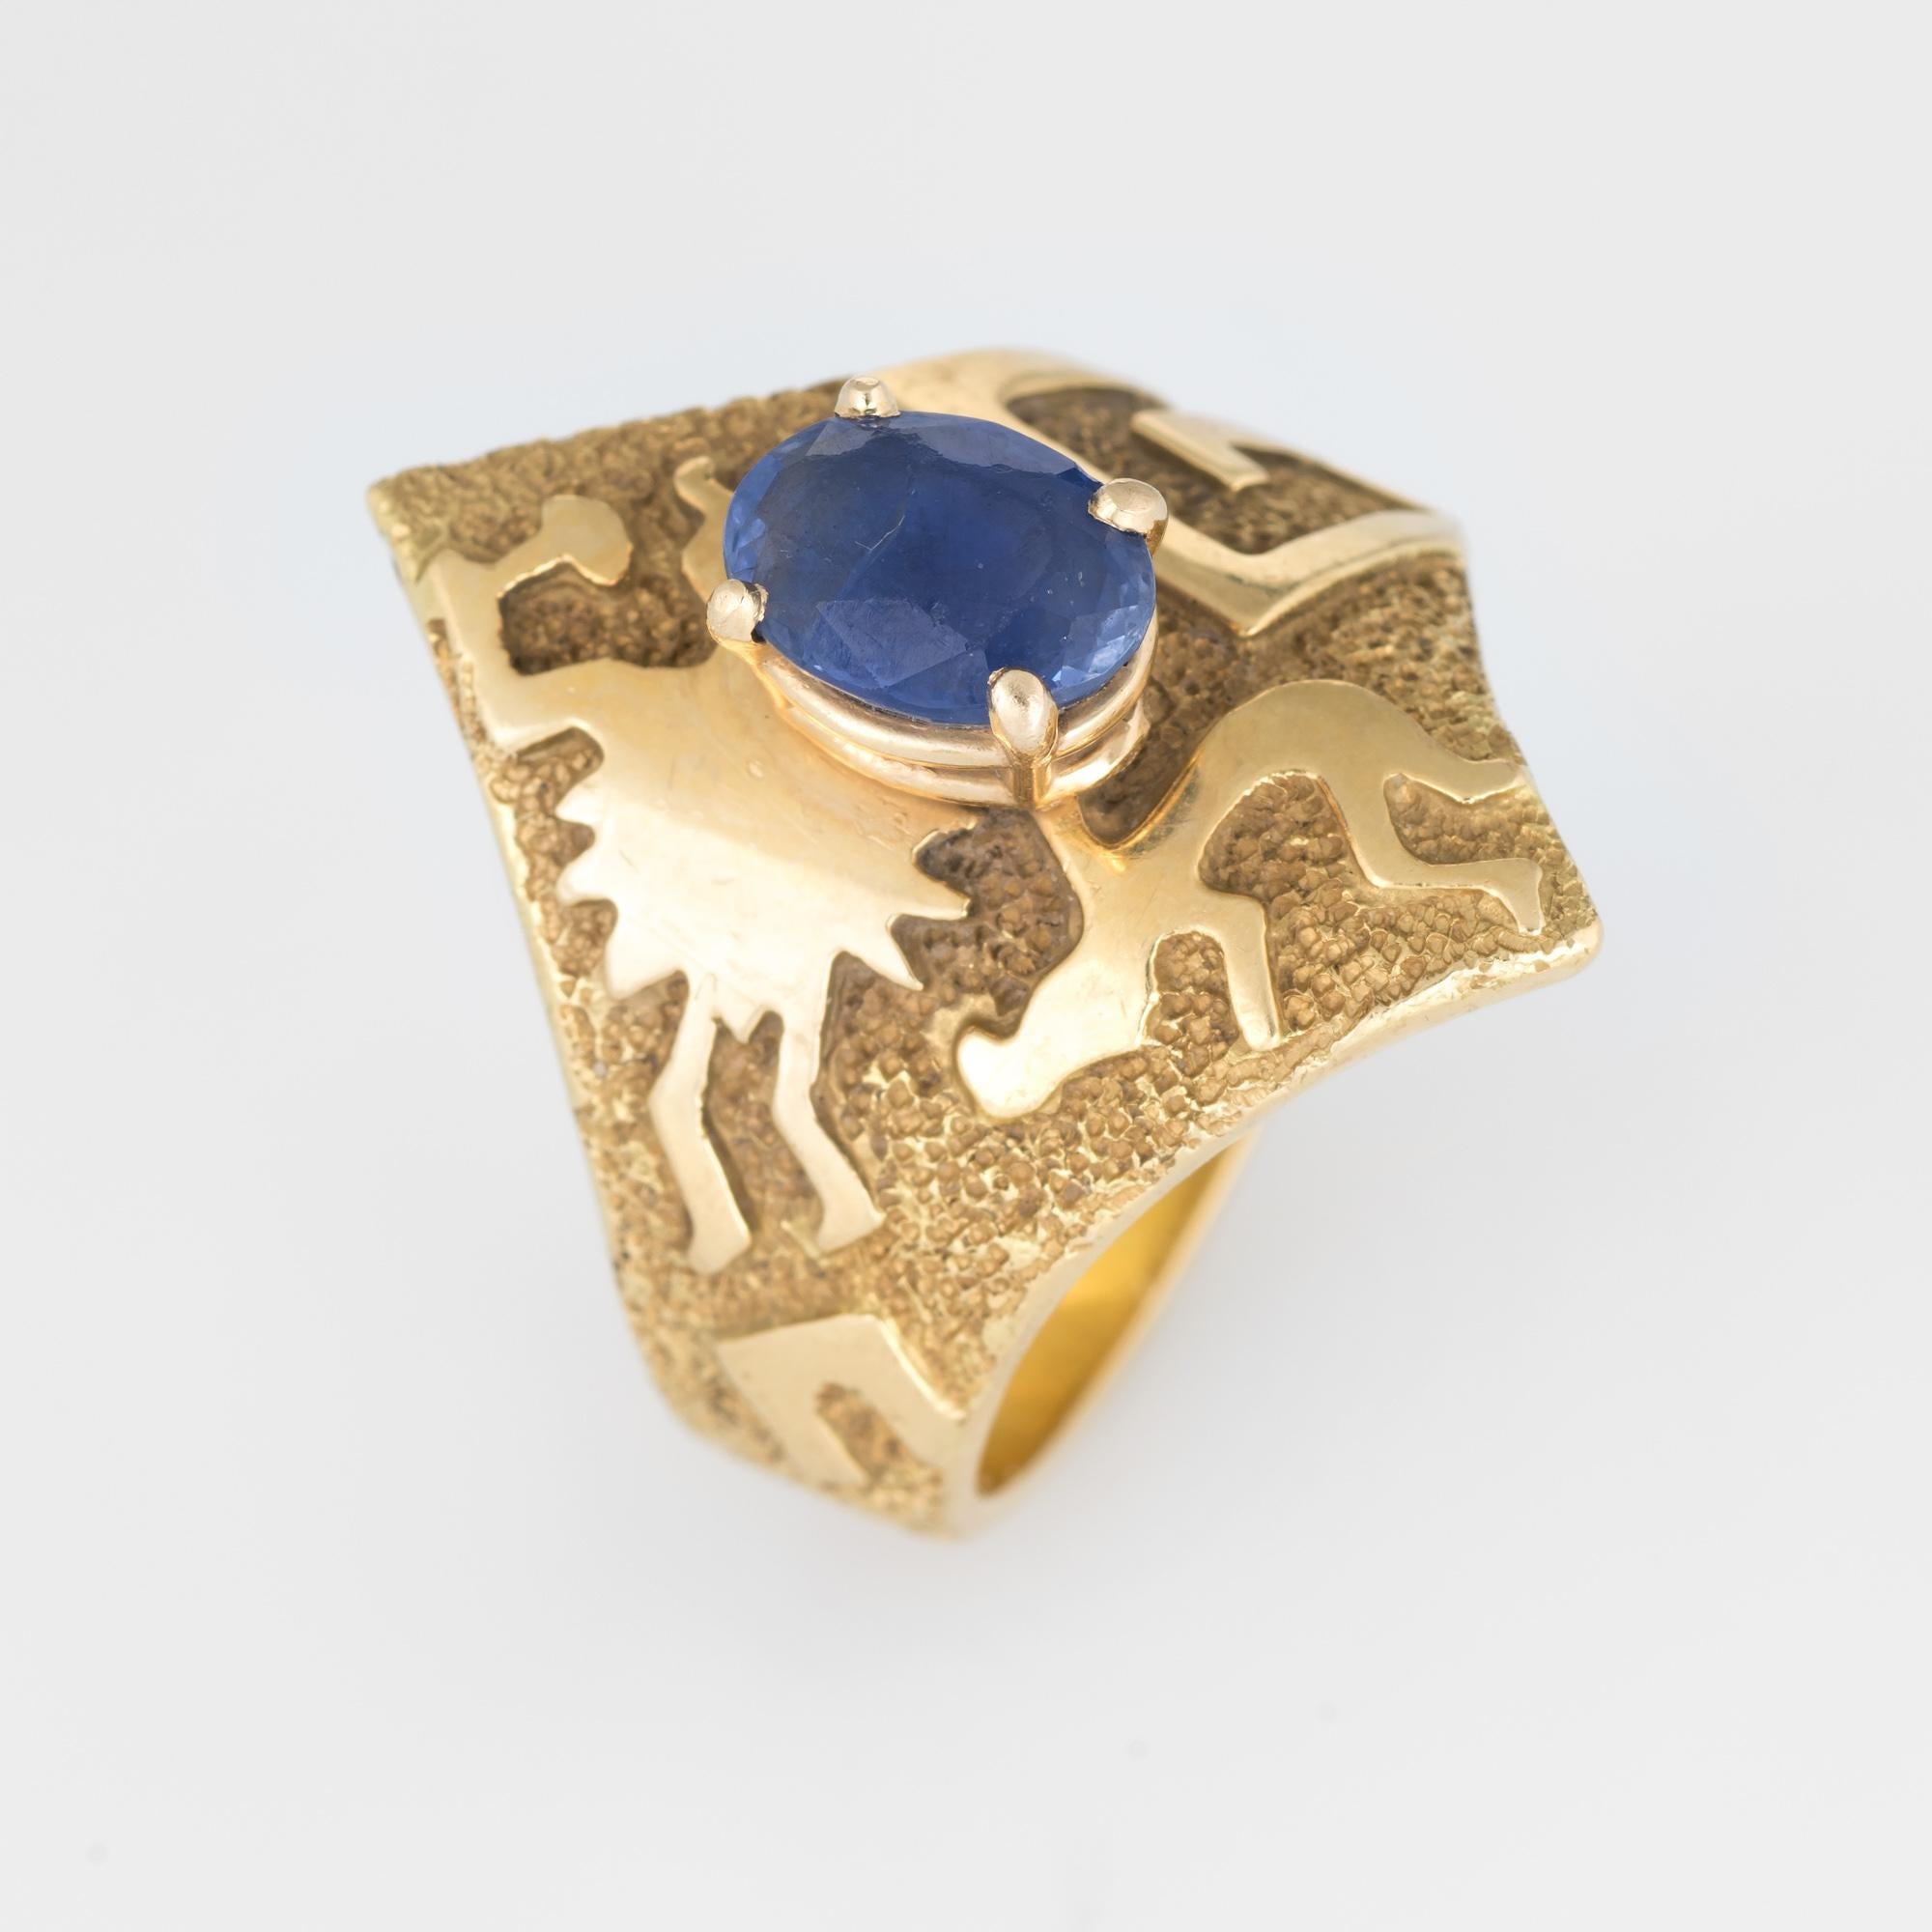 Stylish Ben Nighthorse sapphire ring crafted in 18 karat yellow gold.  

Oval faceted sapphire measures 7.8mm x 6mm (estimated at 1.60 carats). The sapphire shows surface abrasions visible under a 10x loupe.  

The distinct and unique ring is a